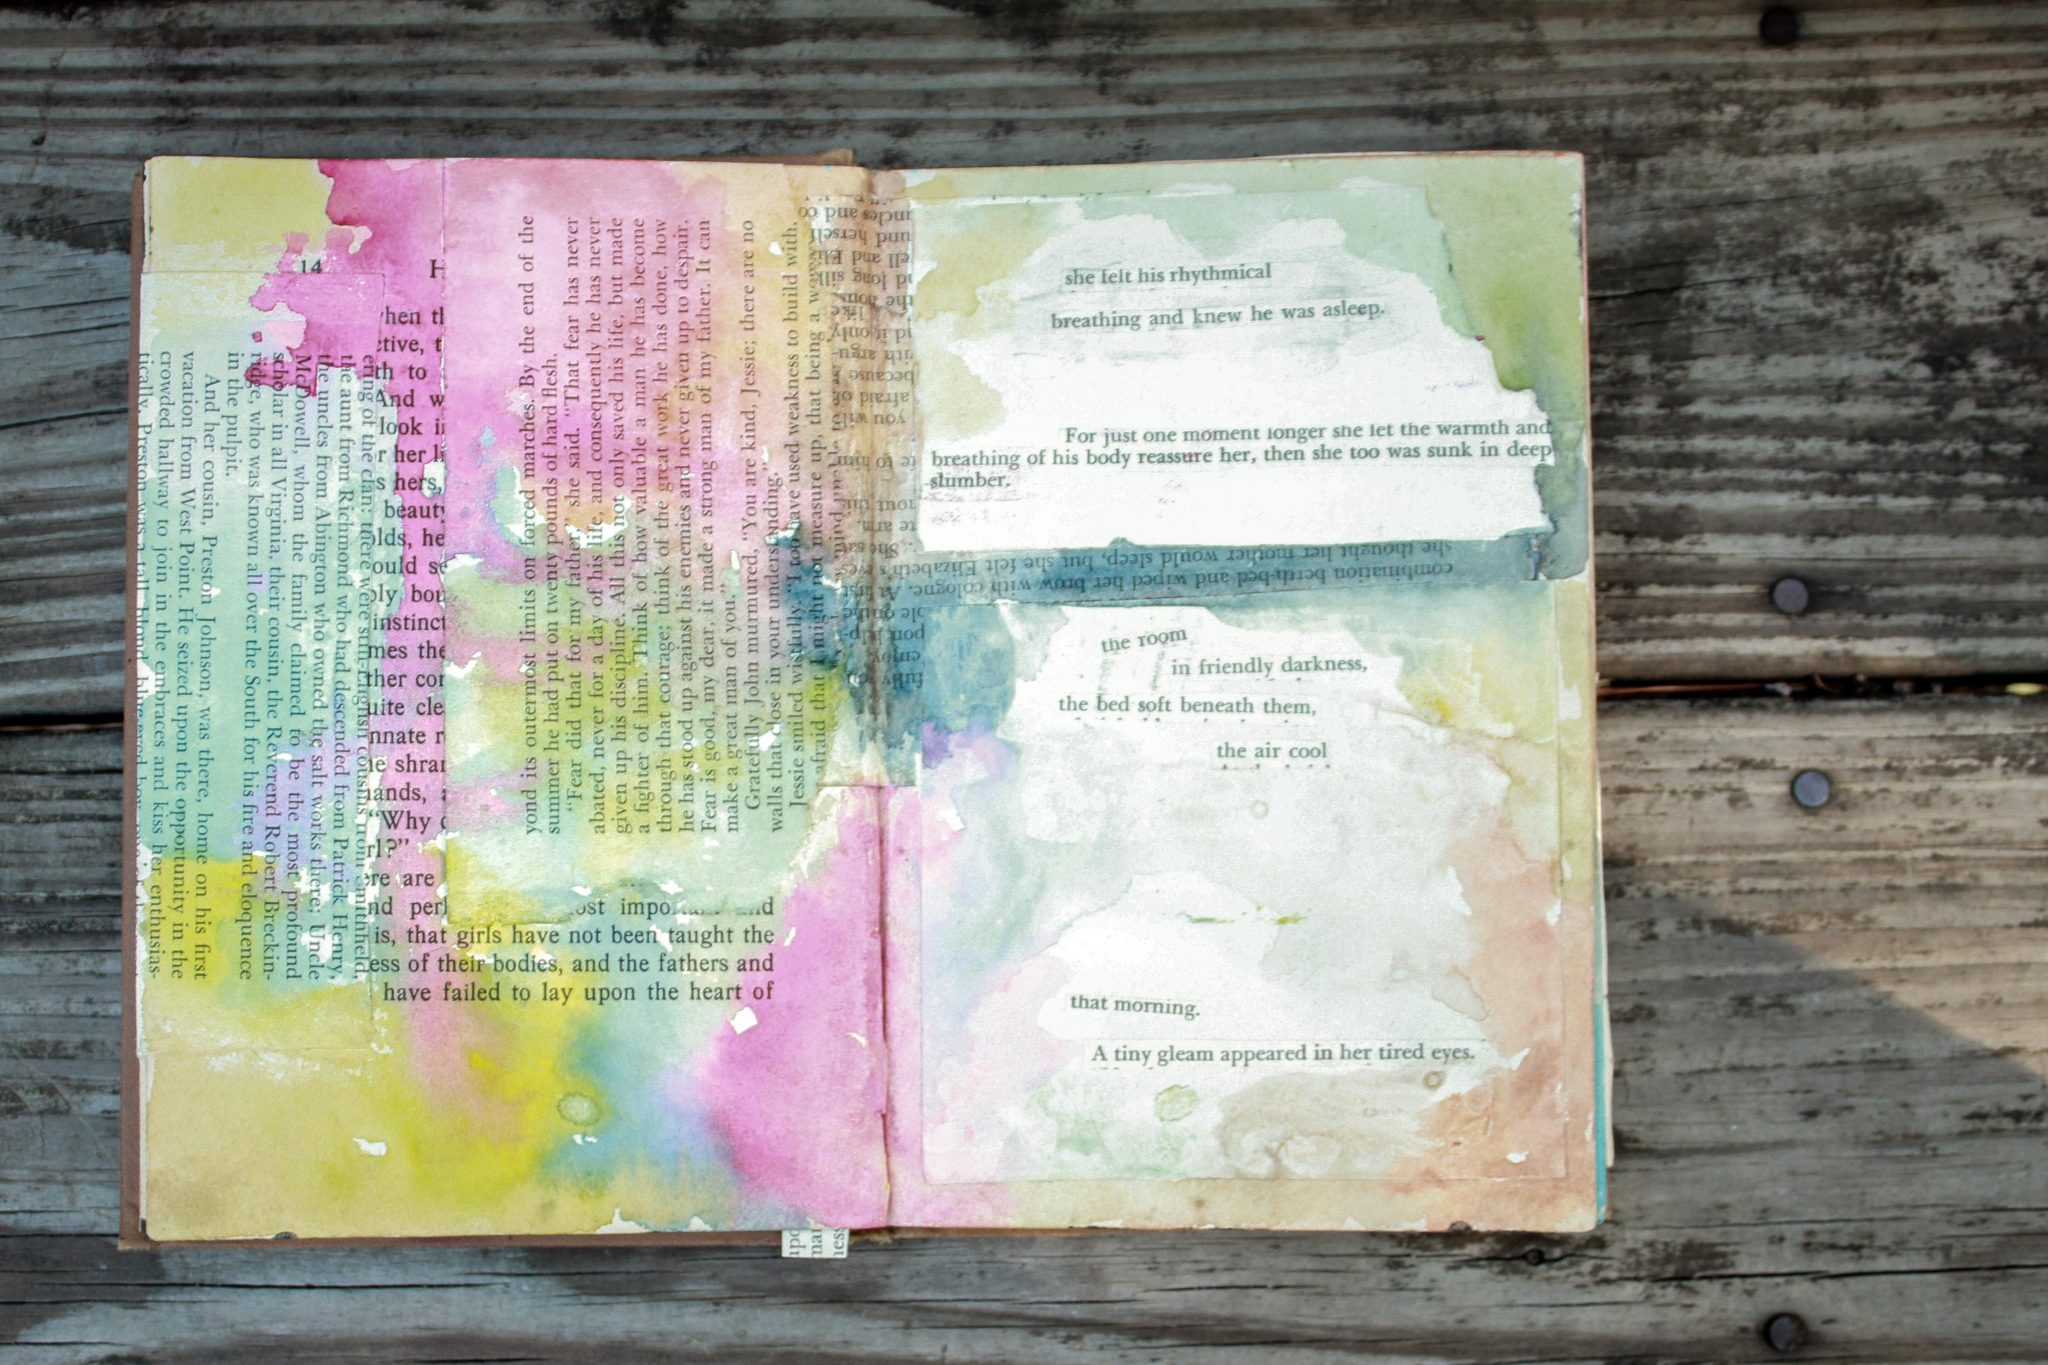 Art Journaling DIY Craft with Antique Books | Visual Art Project | Videmus Fiction Ghostwriting and Story Coaching | Syd Wachs.